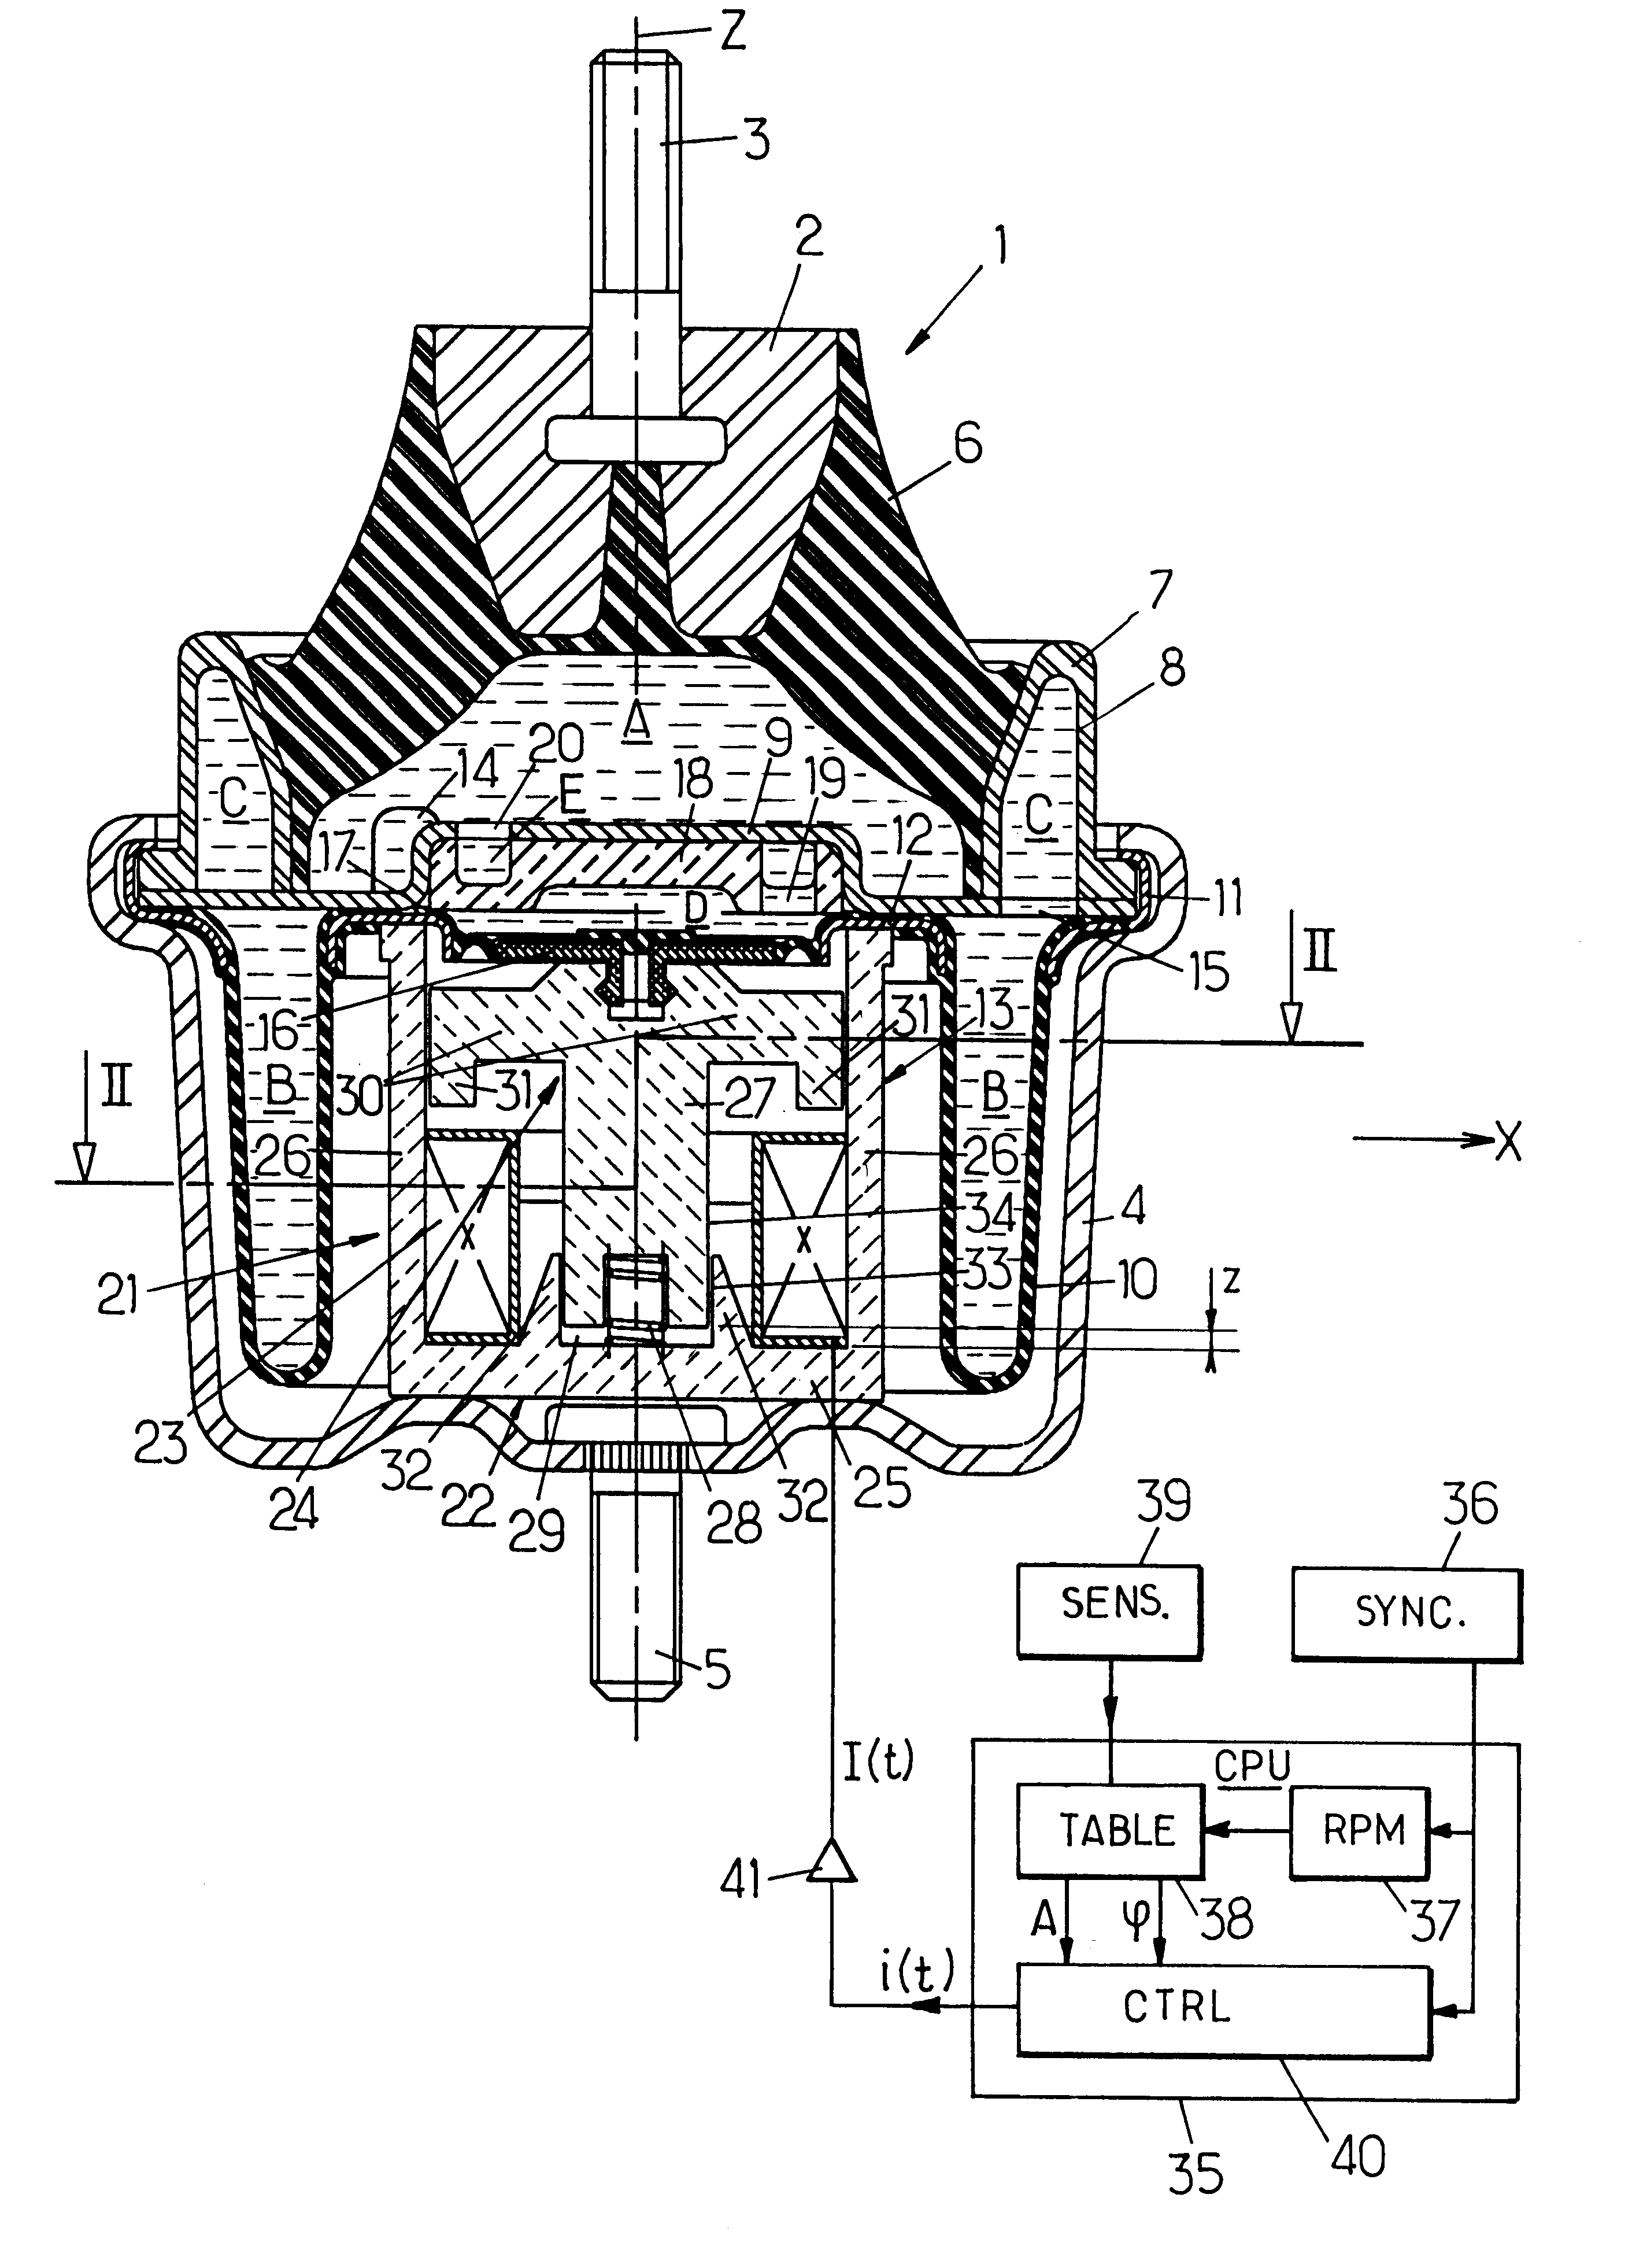 Active hydraulic anti-vibration support and an active anti-vibration system incorporating said support